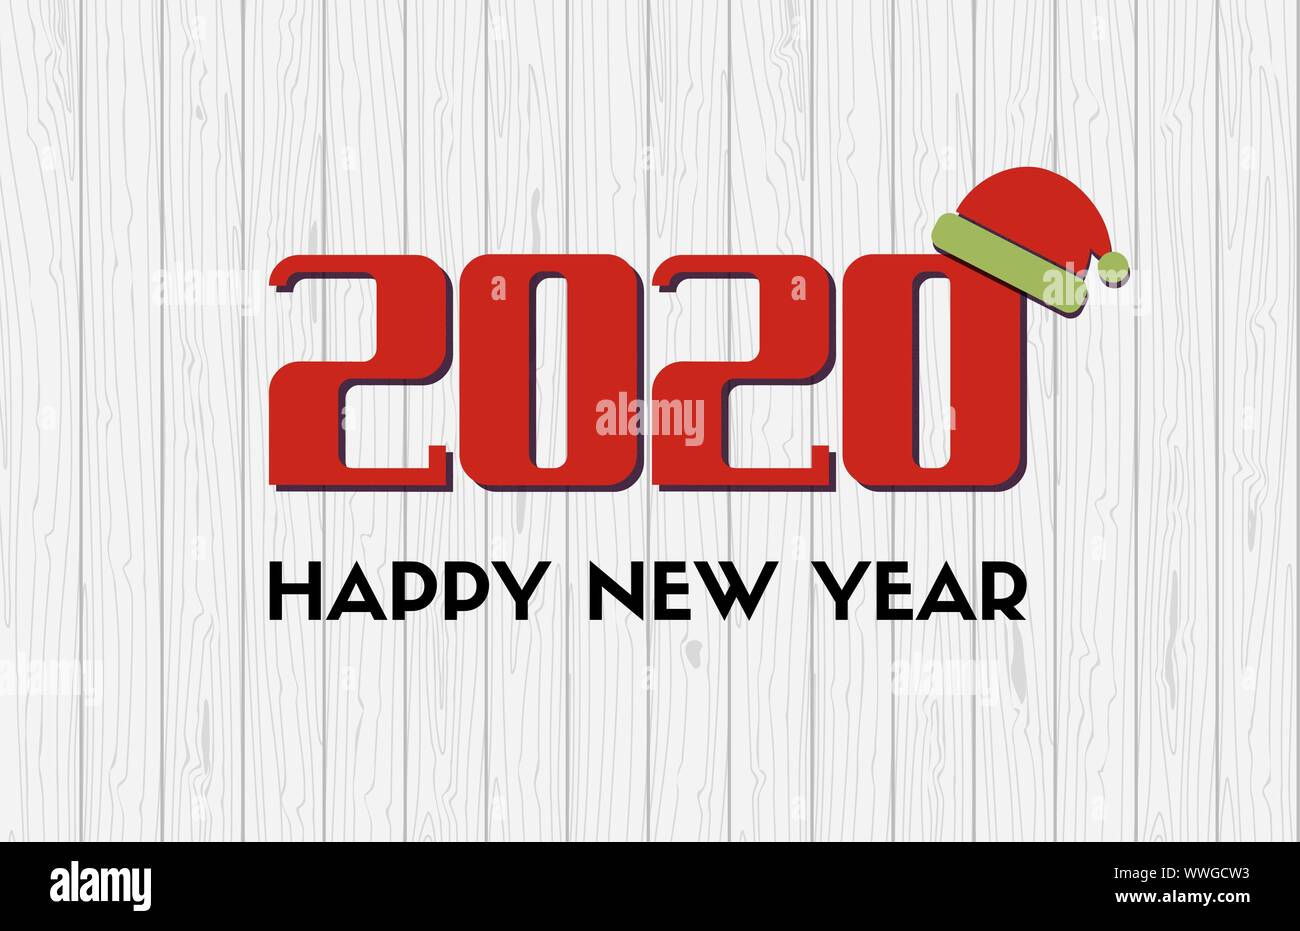 2020. Happy New Year. Vector greeting card with wooden background Stock Vector